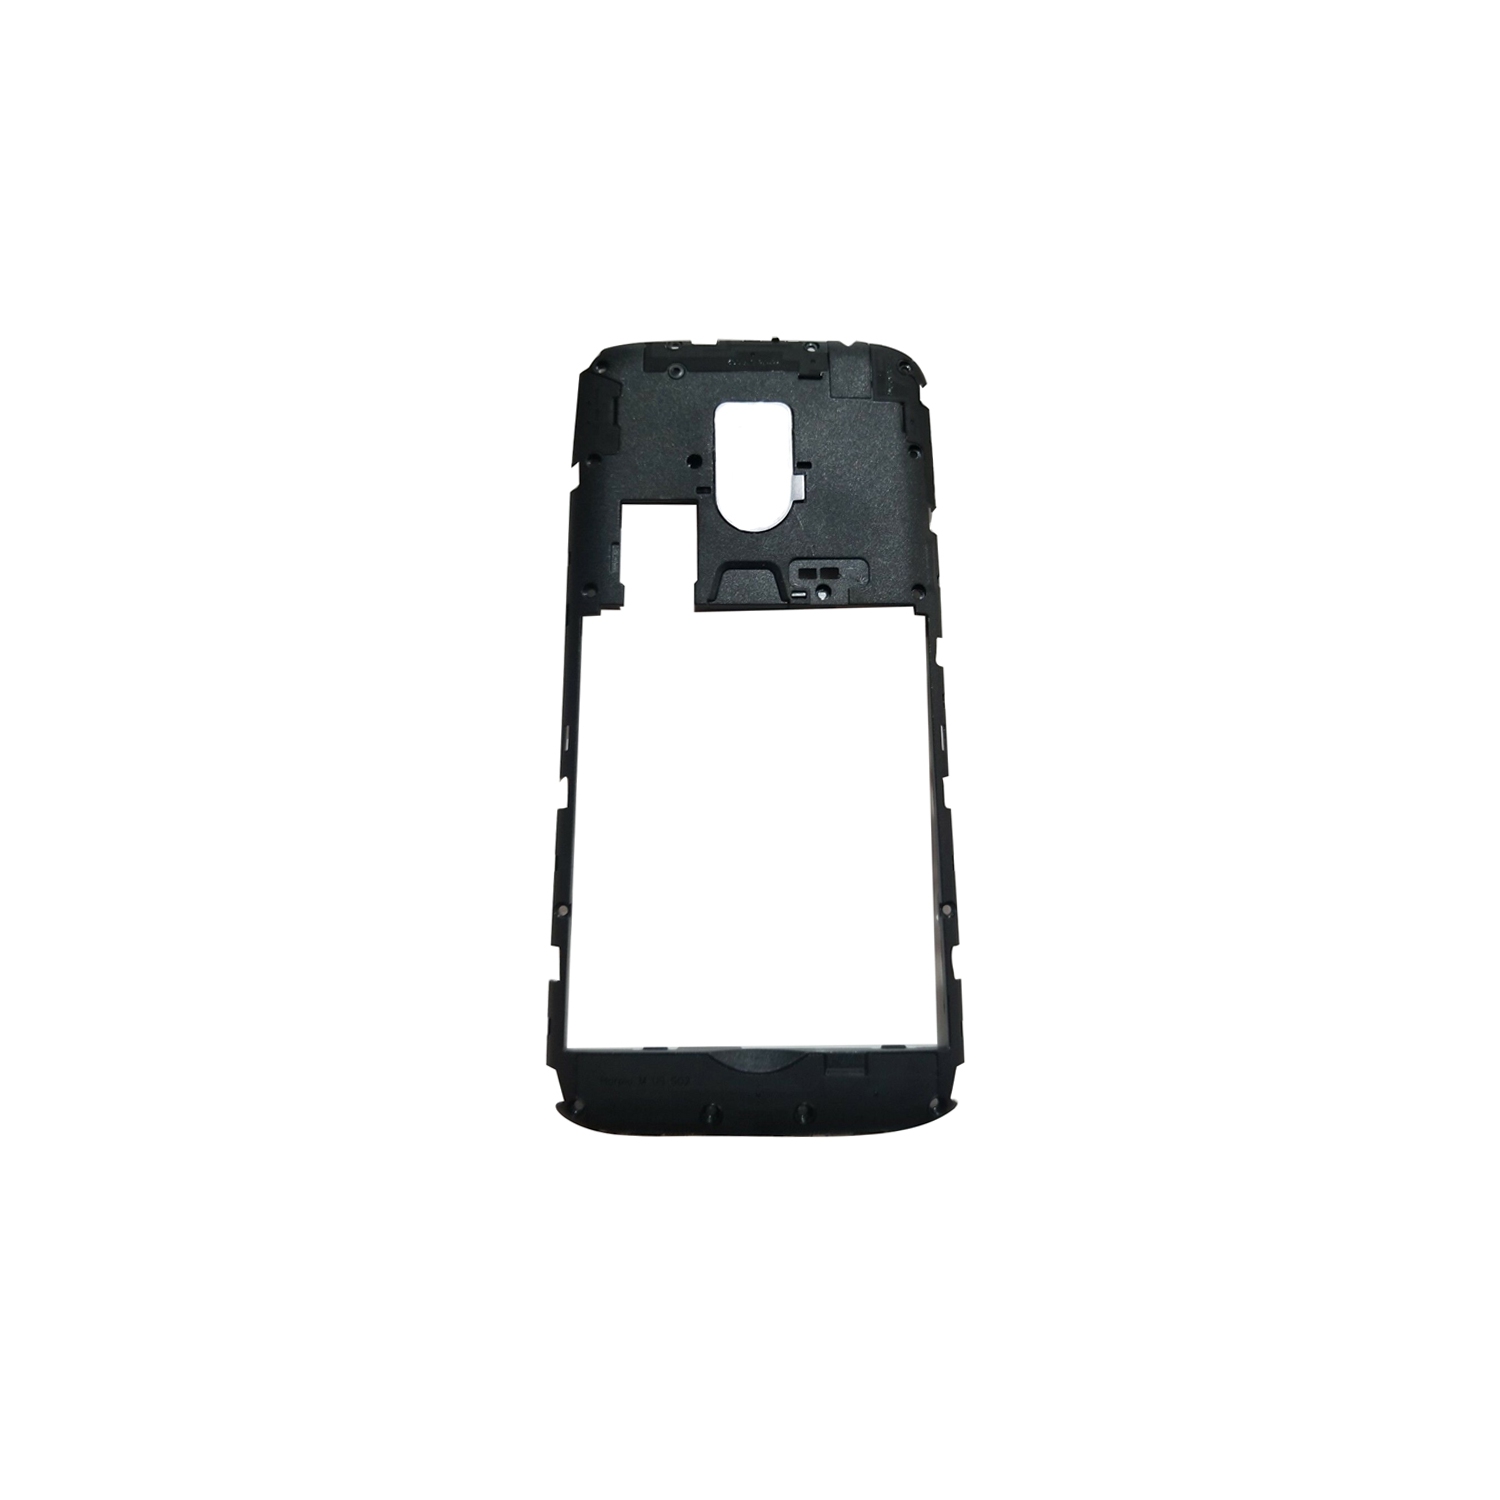 Replacement Middle Frame Compatible With Motorola Moto G4 Play - Black